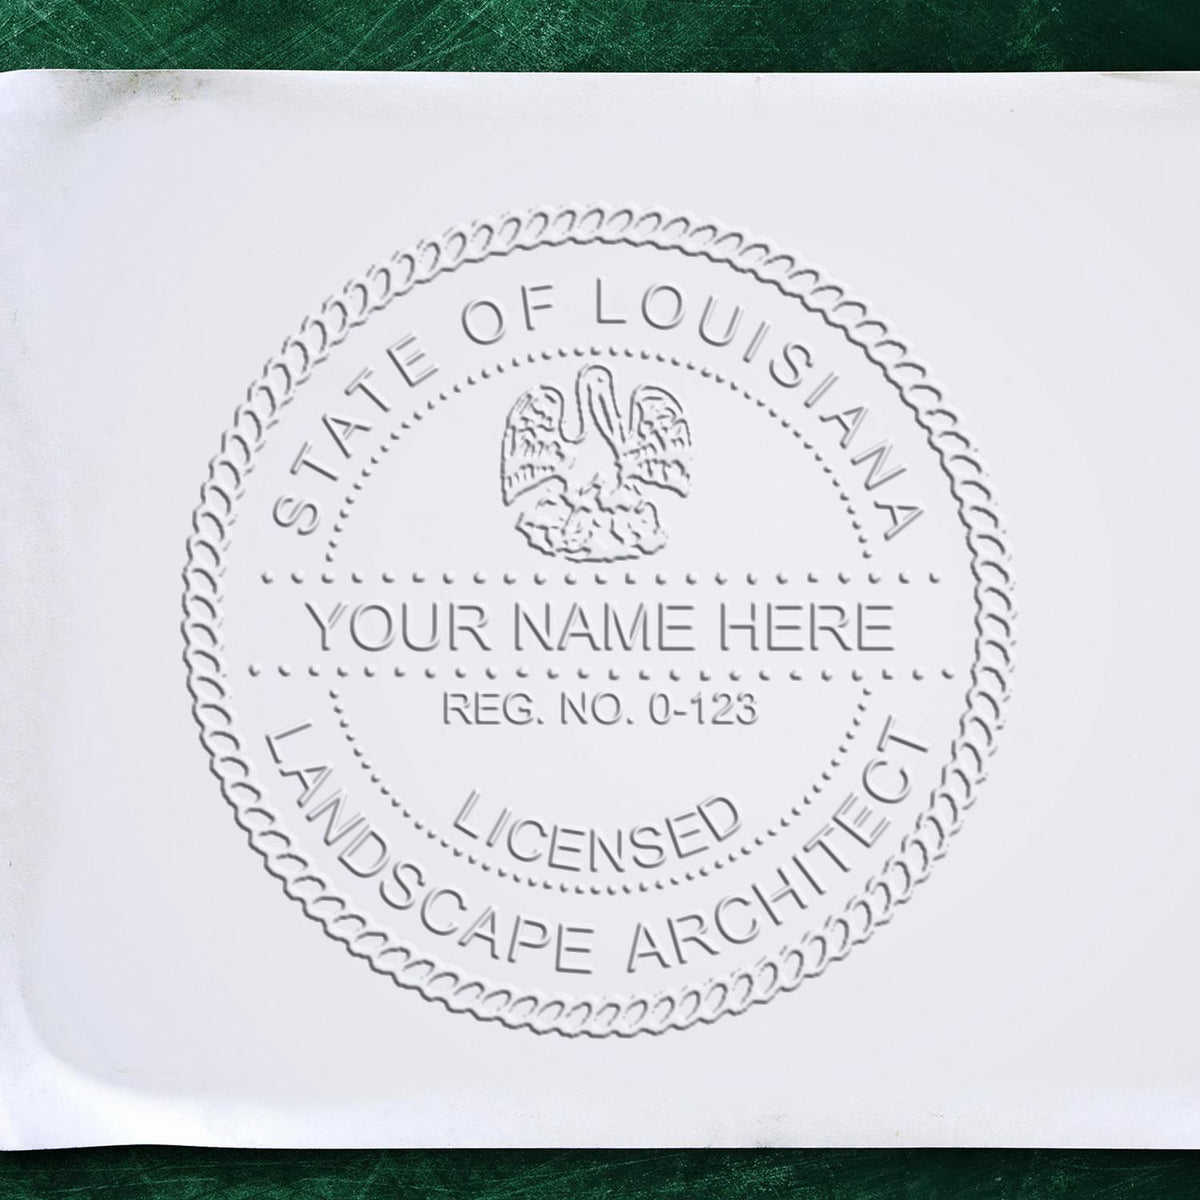 A stamped imprint of the Gift Louisiana Landscape Architect Seal in this stylish lifestyle photo, setting the tone for a unique and personalized product.